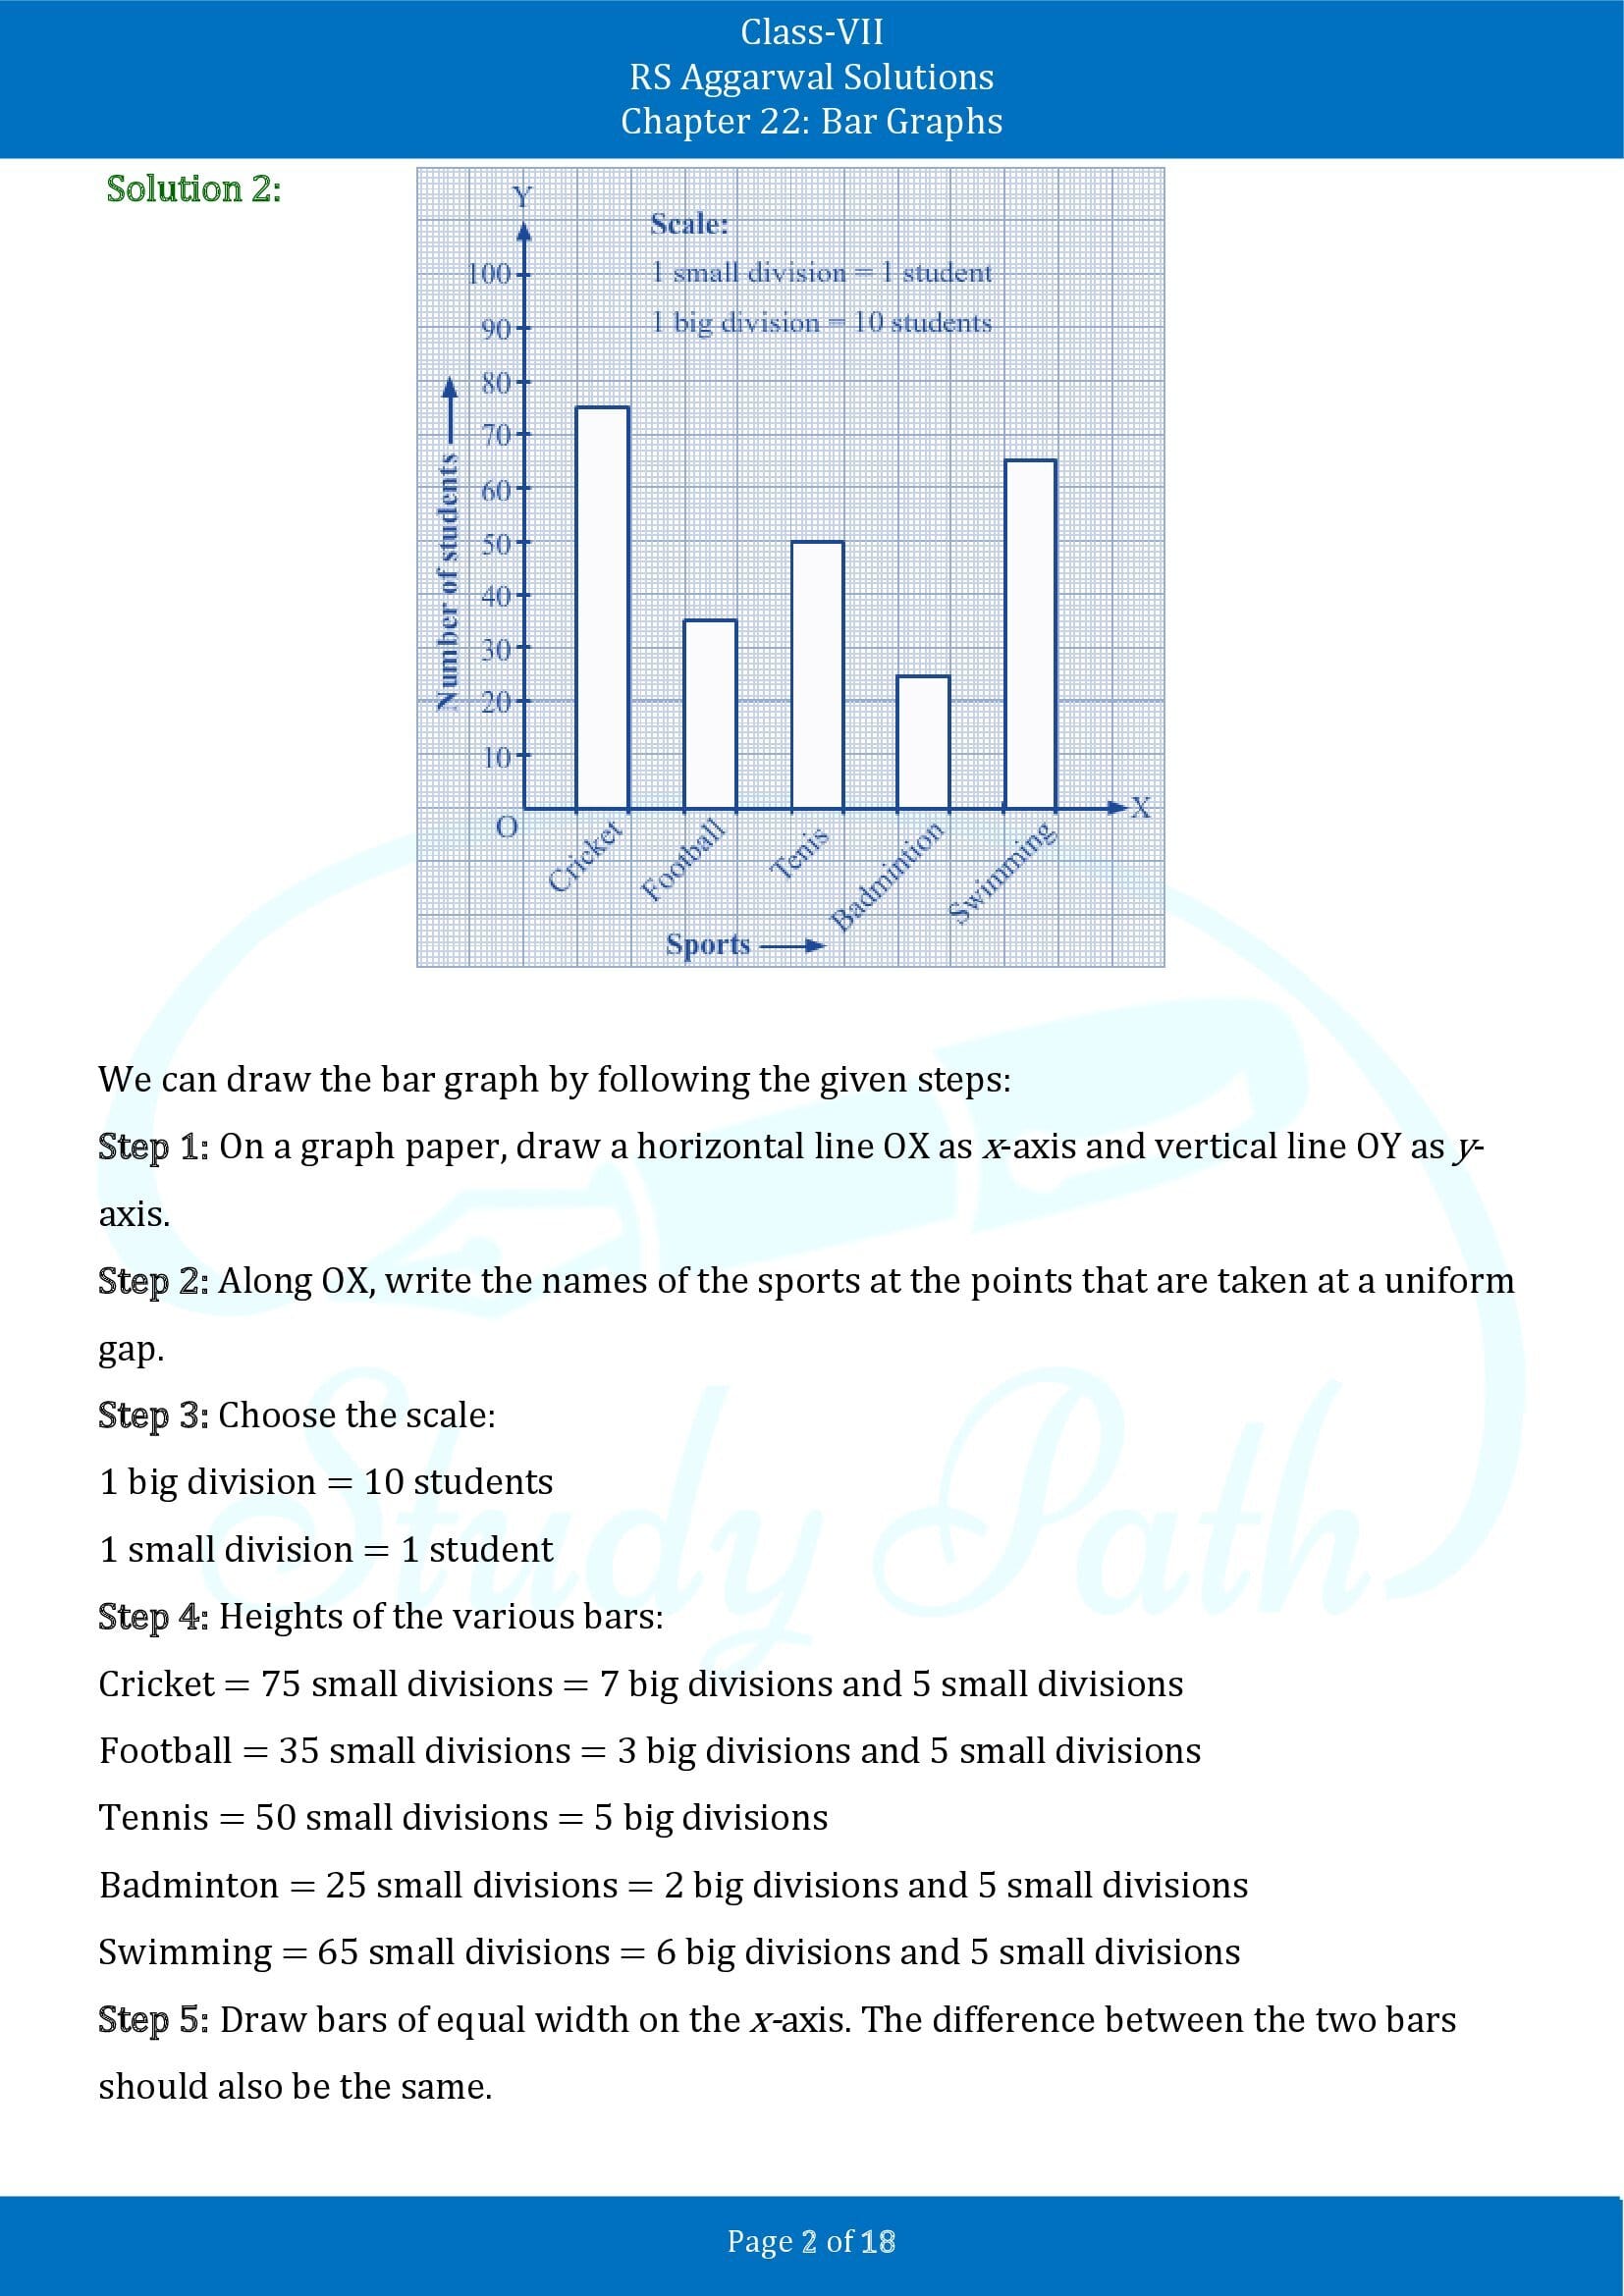 RS Aggarwal Solutions Class 7 Chapter 22 Bar Graphs 00002